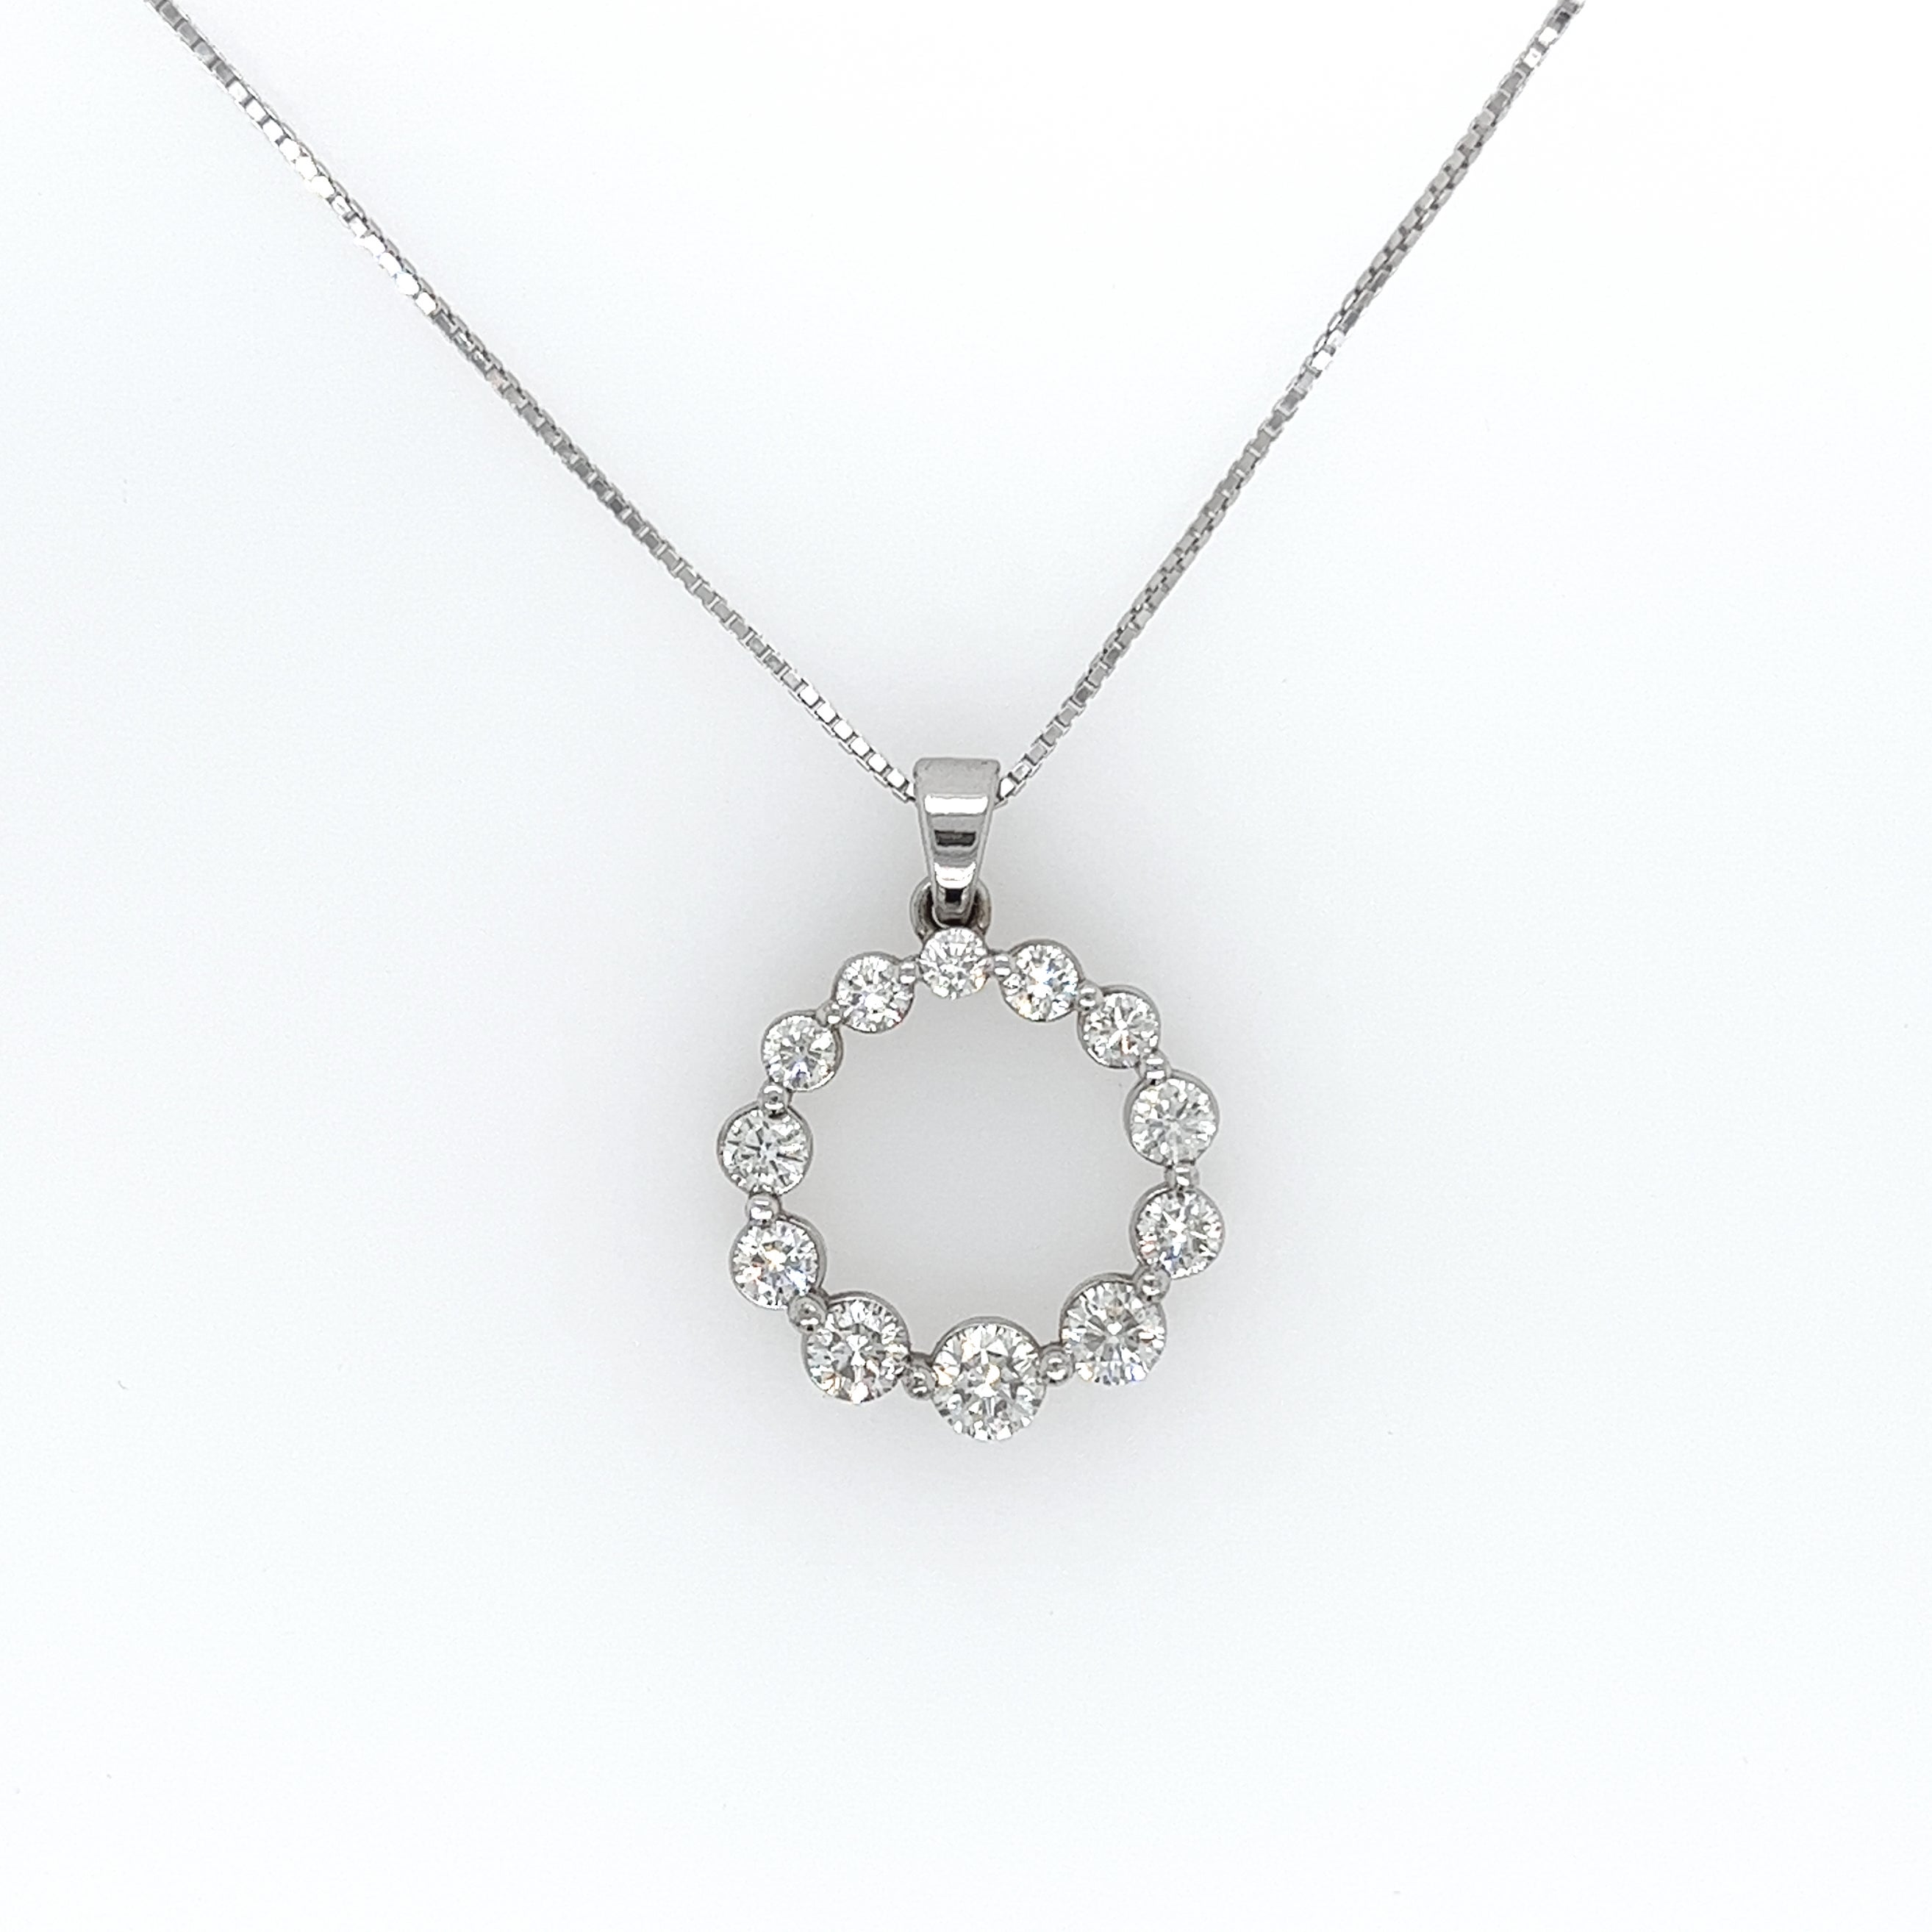 1.82 Carat Round Diamond Circle Of Life Pendant Necklace

-Material: 18K White Gold;
-Circle Width: 20mm;
-Diamonds: Round Brilliant Cuts, 1.82cts;
-Quality: F-G color, VS-SI clarity;
-Chain: 16 inches
-4.3grams

Handmade in New York City.